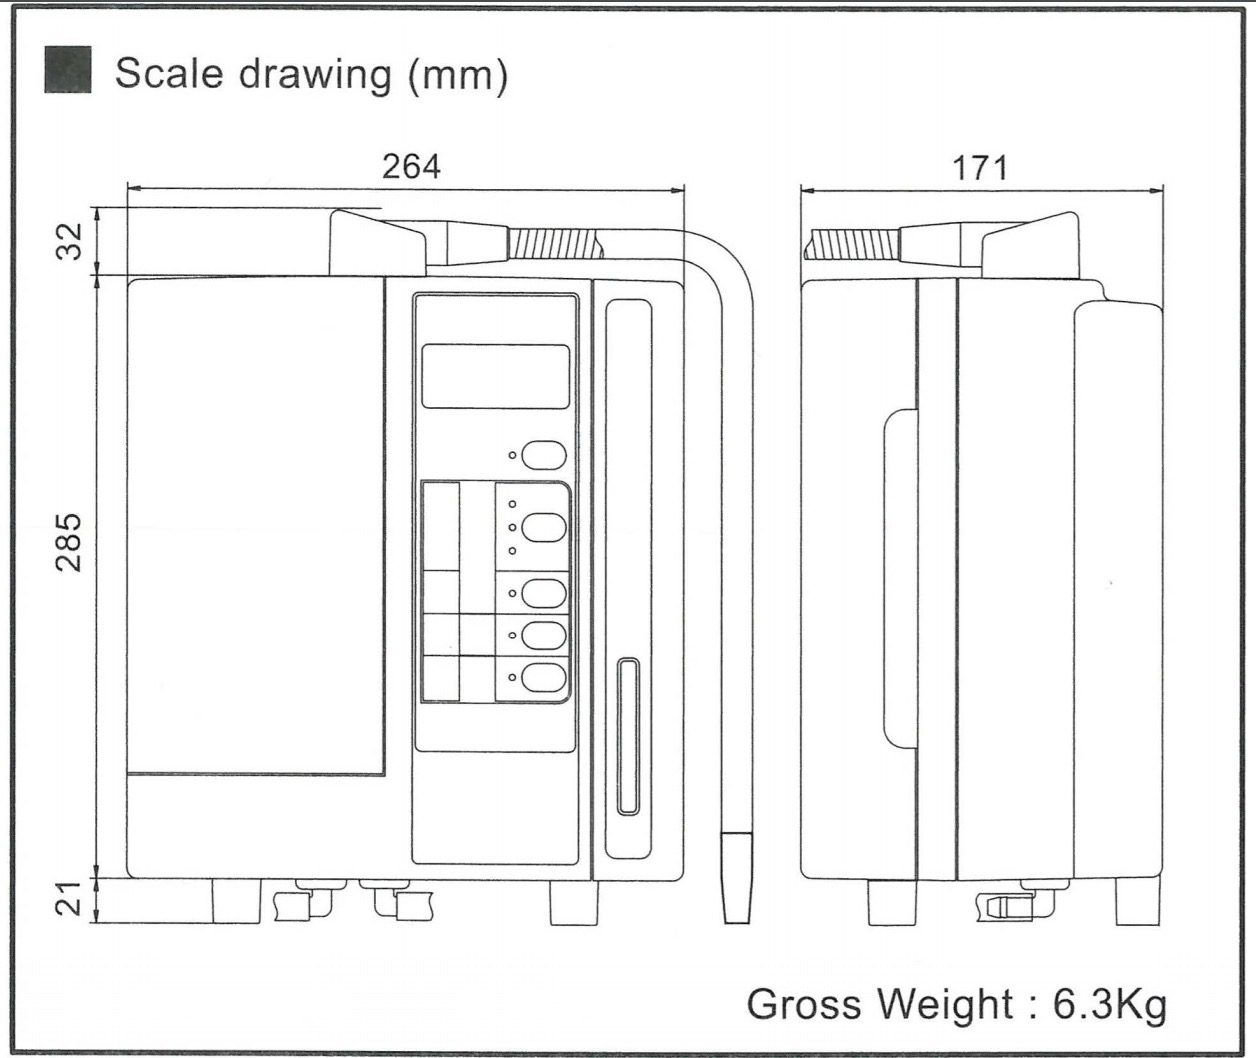 LeveLuk SD 501 Scale Drawing